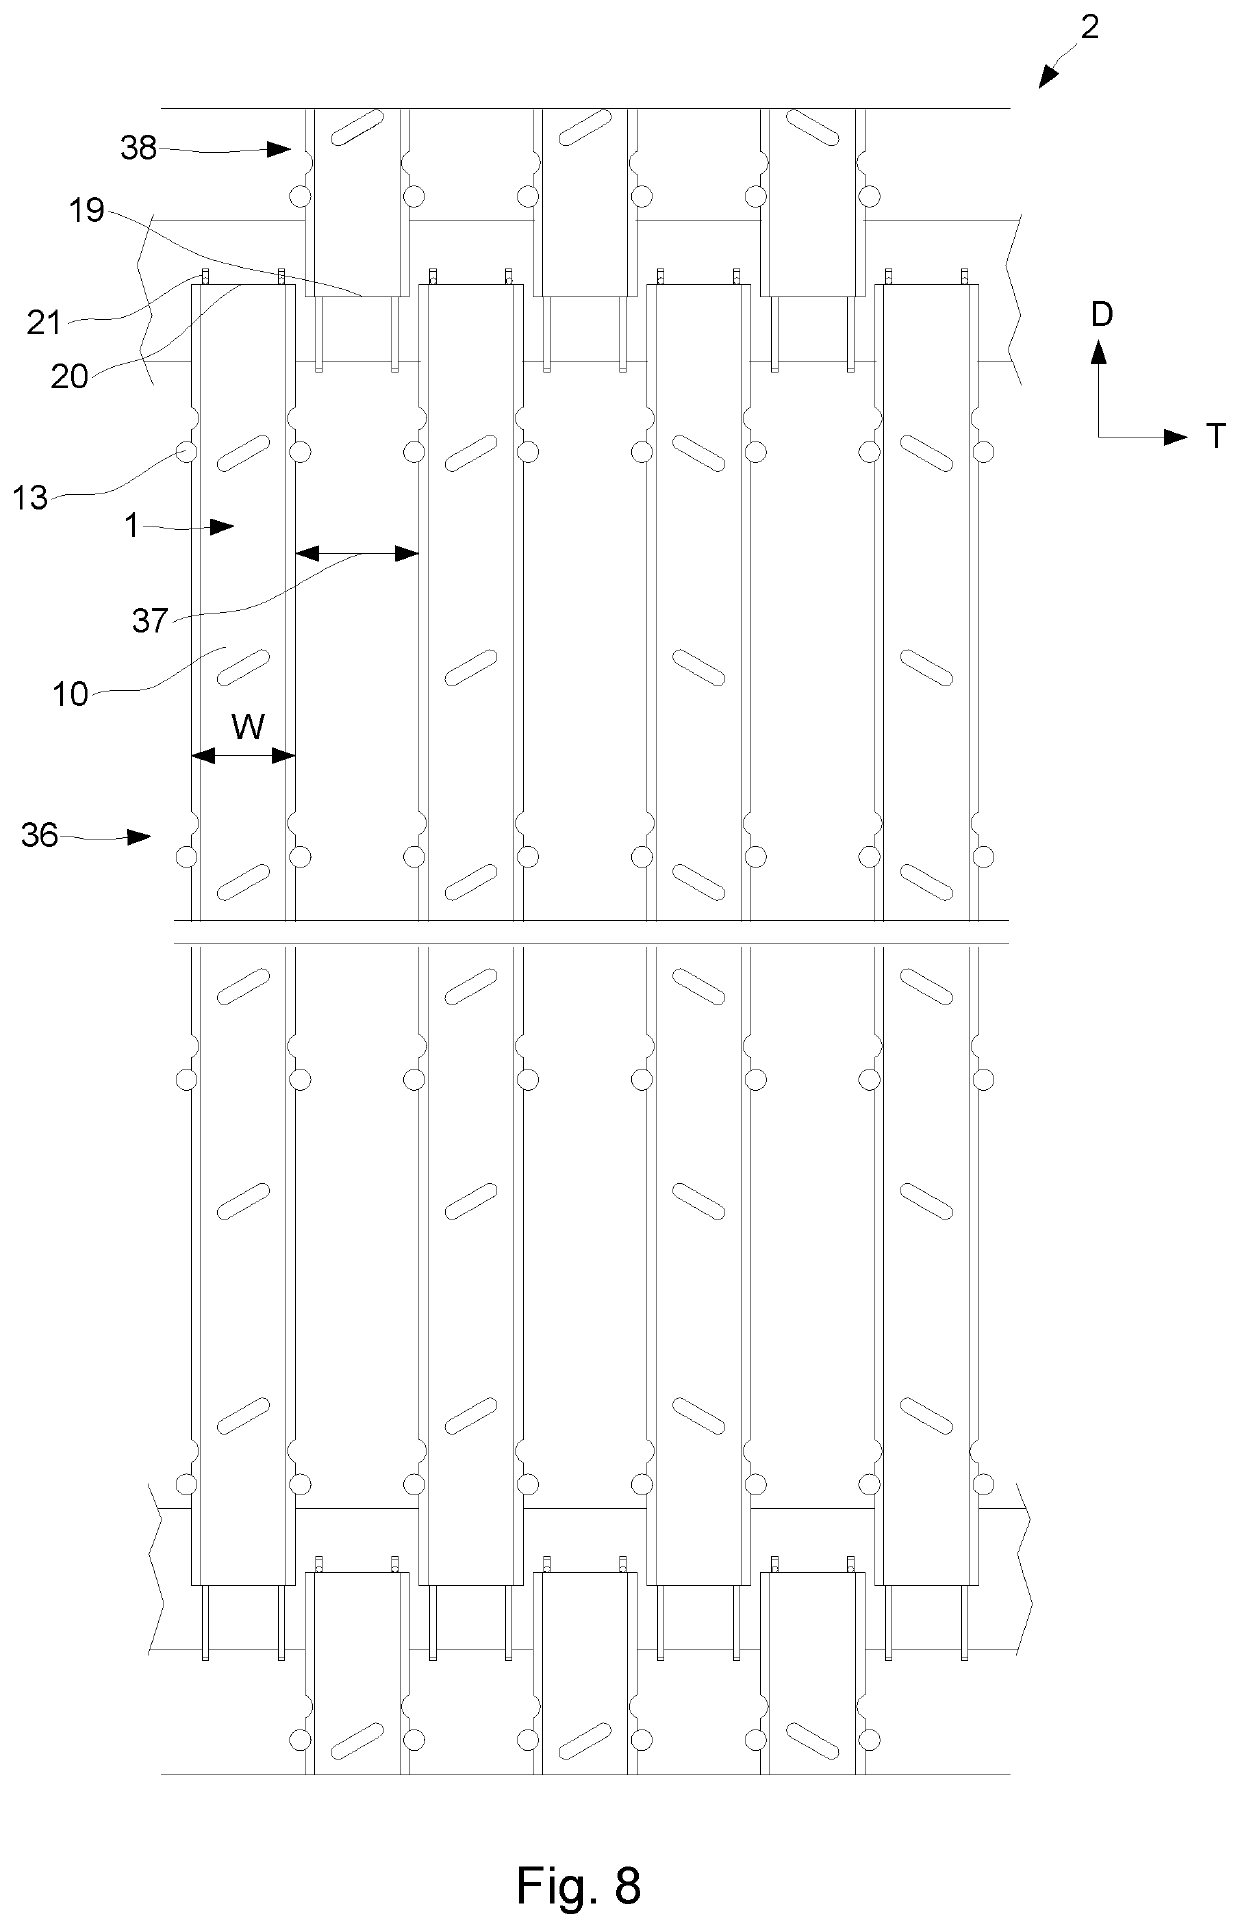 Support structure for whey draining belt